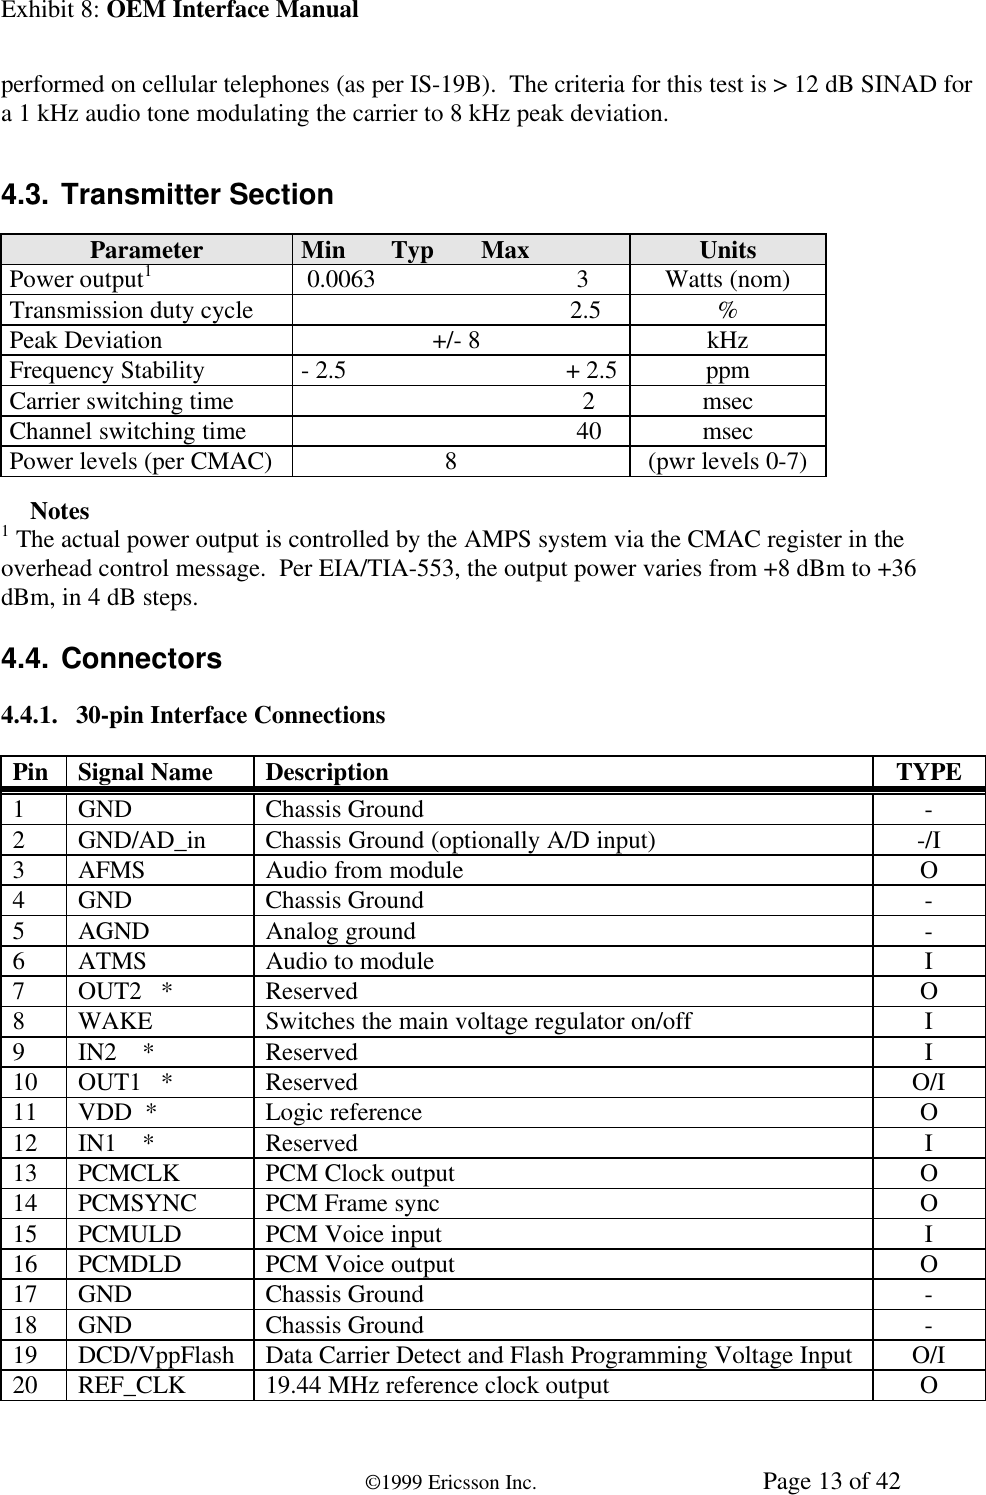 Exhibit 8: OEM Interface Manual©1999 Ericsson Inc. Page 13 of 42performed on cellular telephones (as per IS-19B).  The criteria for this test is &gt; 12 dB SINAD fora 1 kHz audio tone modulating the carrier to 8 kHz peak deviation.4.3. Transmitter SectionParameter Min Typ Max UnitsPower output1 0.0063                                3 Watts (nom)Transmission duty cycle                                            2.5 %Peak Deviation                      +/- 8 kHzFrequency Stability - 2.5                                   + 2.5 ppmCarrier switching time                                              2 msecChannel switching time                                             40 msecPower levels (per CMAC)                        8 (pwr levels 0-7)ÜÜ Notes1 The actual power output is controlled by the AMPS system via the CMAC register in theoverhead control message.  Per EIA/TIA-553, the output power varies from +8 dBm to +36dBm, in 4 dB steps.4.4. Connectors4.4.1. 30-pin Interface ConnectionsPin Signal Name Description TYPE1GND Chassis Ground -2GND/AD_in Chassis Ground (optionally A/D input) -/I3AFMS Audio from module O4GND Chassis Ground -5AGND Analog ground -6ATMS Audio to module I7OUT2   * Reserved O8WAKE Switches the main voltage regulator on/off I9IN2    * Reserved I10 OUT1   * Reserved O/I11 VDD  * Logic reference O12 IN1    * Reserved I13 PCMCLK PCM Clock output O14 PCMSYNC PCM Frame sync O15 PCMULD PCM Voice input I16 PCMDLD PCM Voice output O17 GND Chassis Ground -18 GND Chassis Ground -19 DCD/VppFlash Data Carrier Detect and Flash Programming Voltage Input O/I20 REF_CLK 19.44 MHz reference clock output O